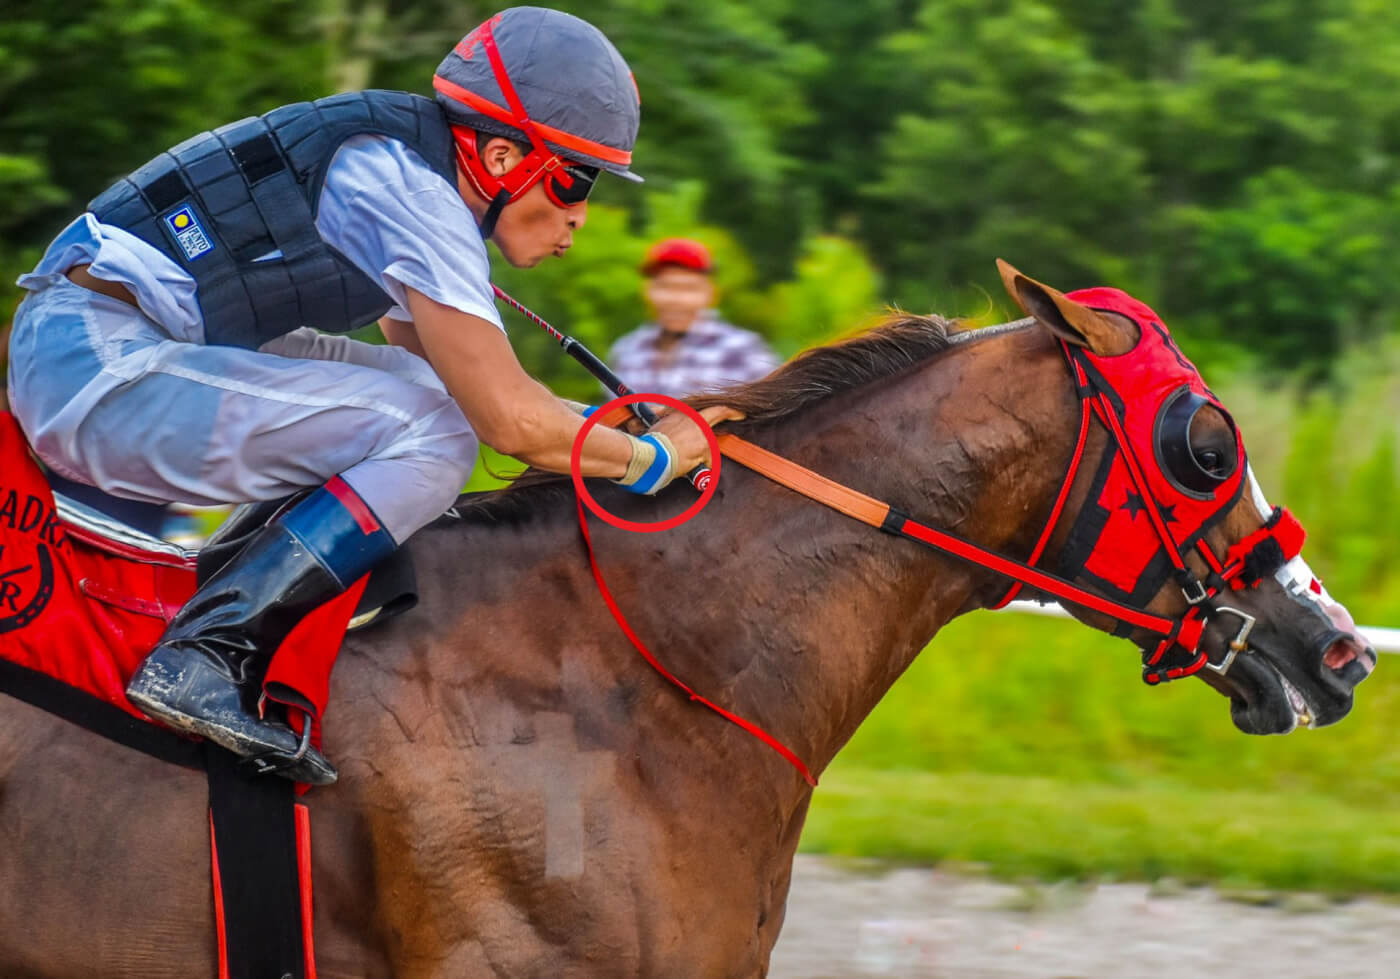 Jockey riding horse and red circle emphasizing shock devices on his wrist